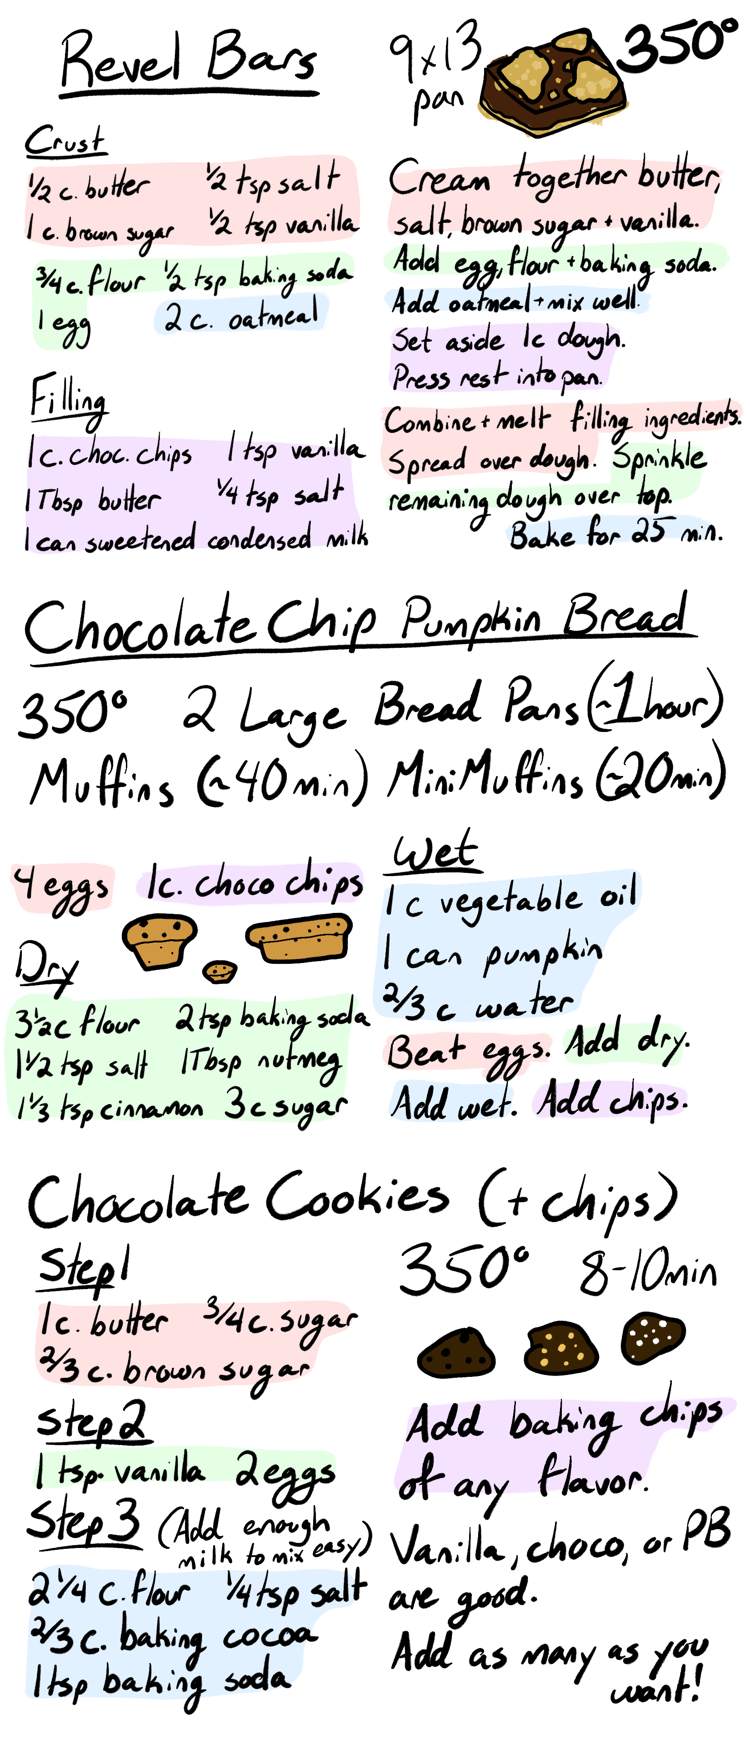 Three hand written recipes tittled Revel Bars, Chocolate Chip Pumpkin Bread, and Chocolate Cookies (with optional chips)